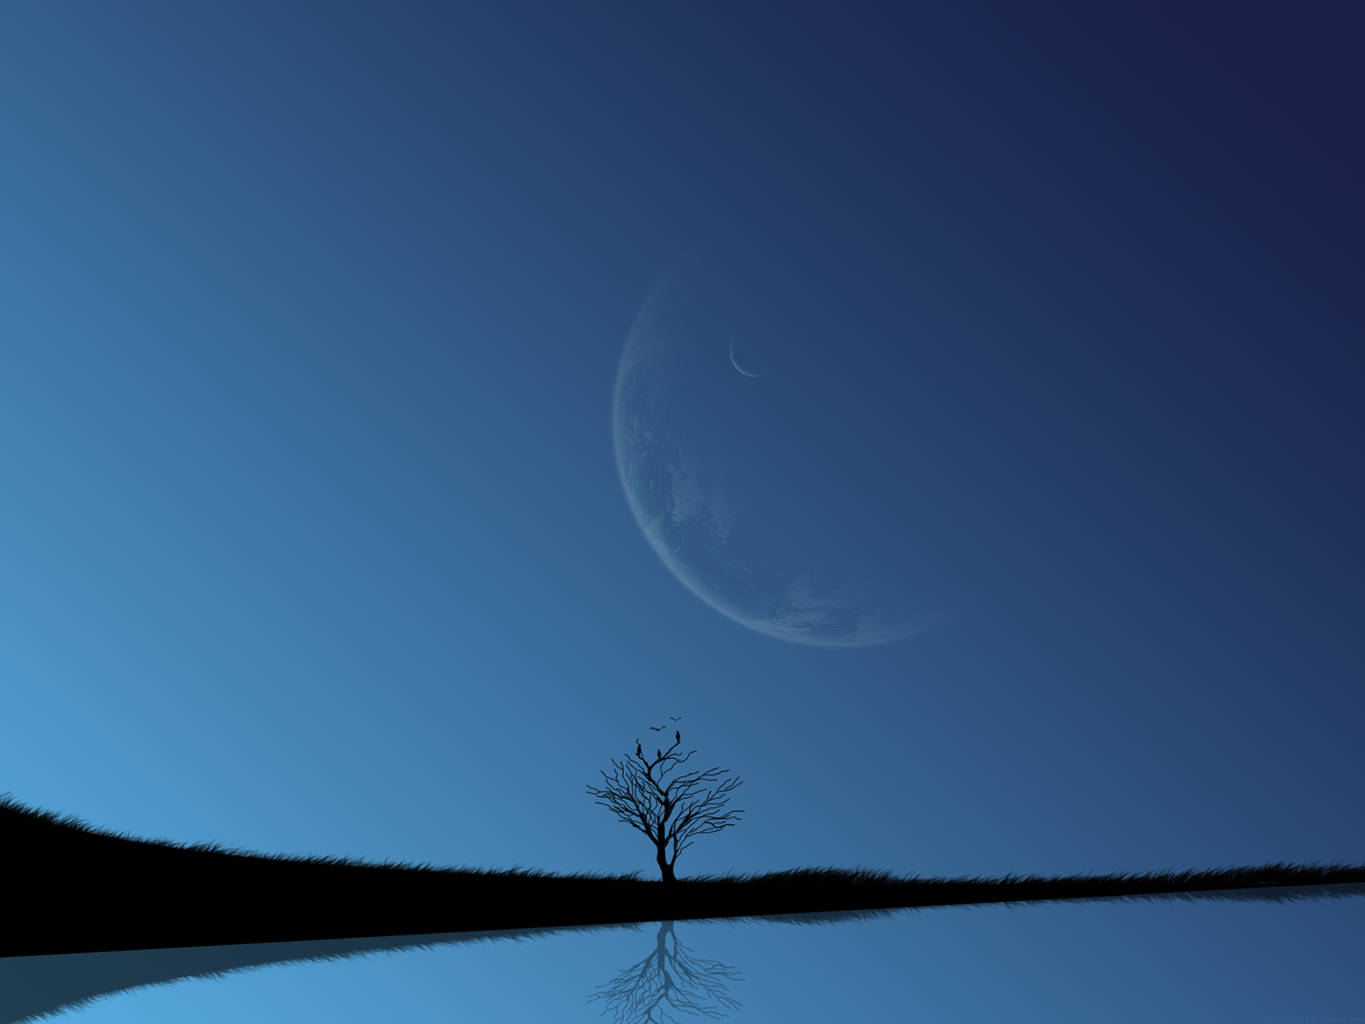 Huge Moon Over A Lone Tree As A Minimalist Nature Wallpaper